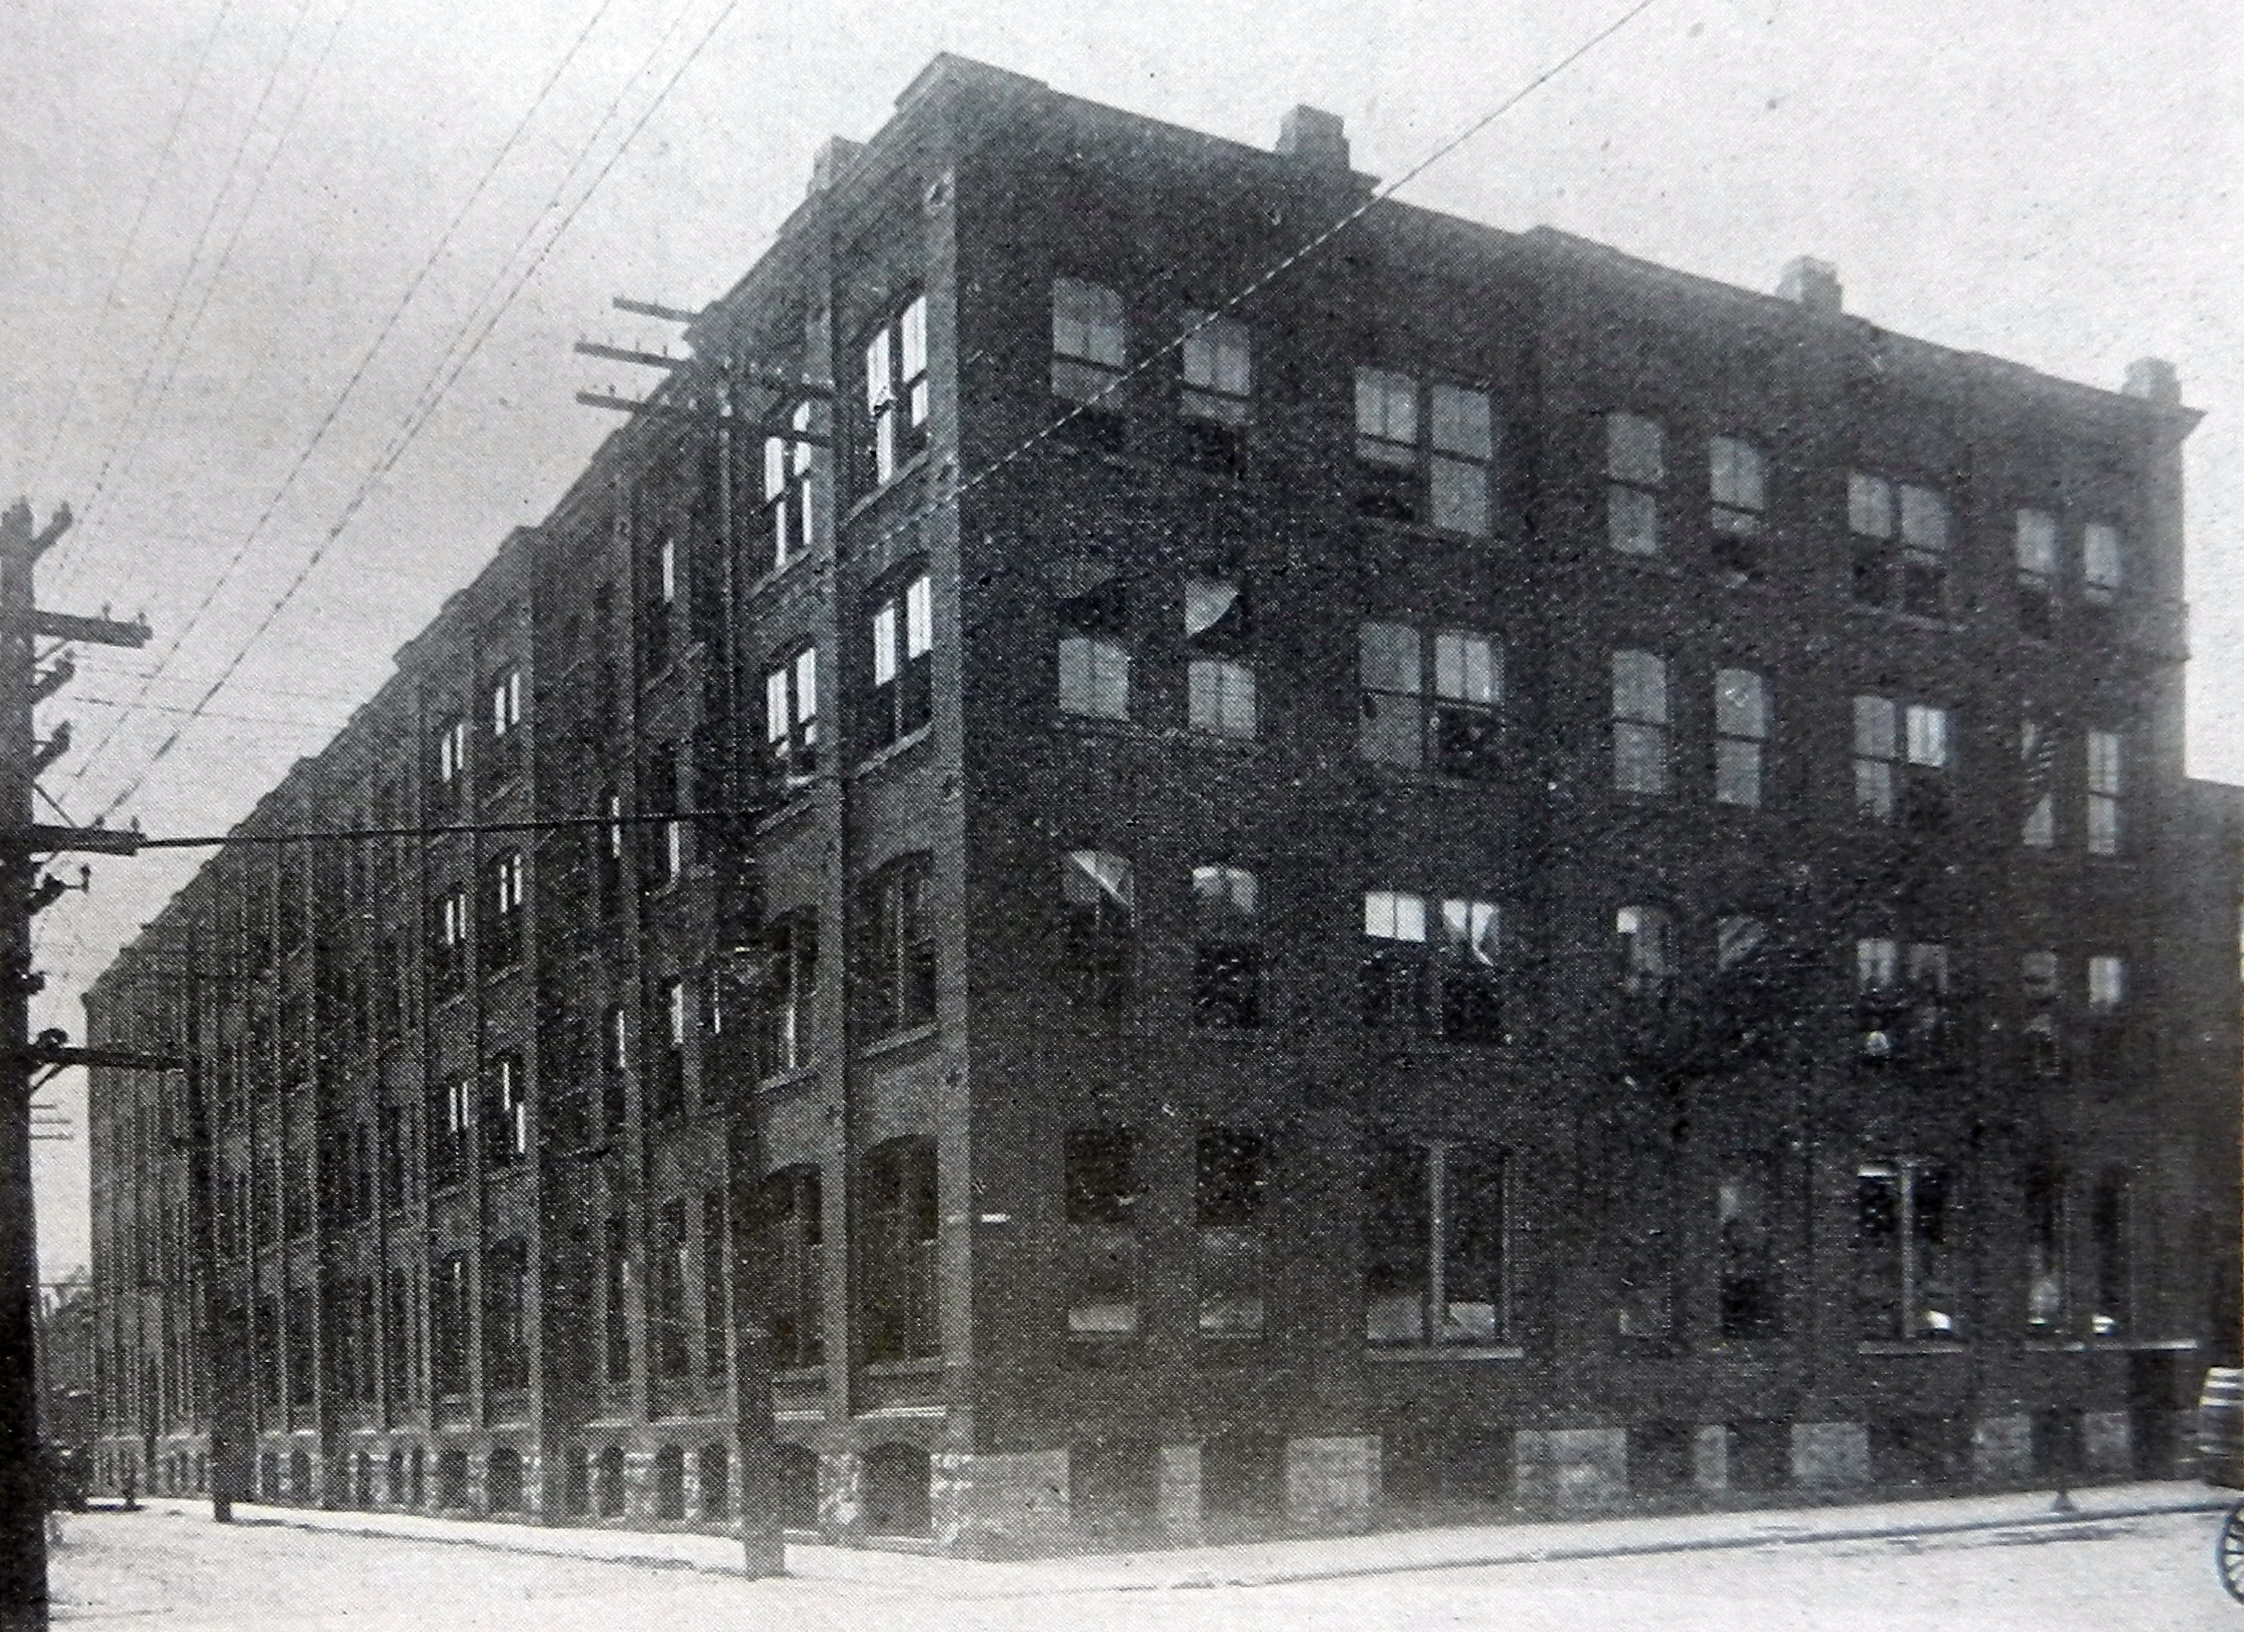 A photograph of John McPherson's four-storey factory, which occupies almost a full city block.